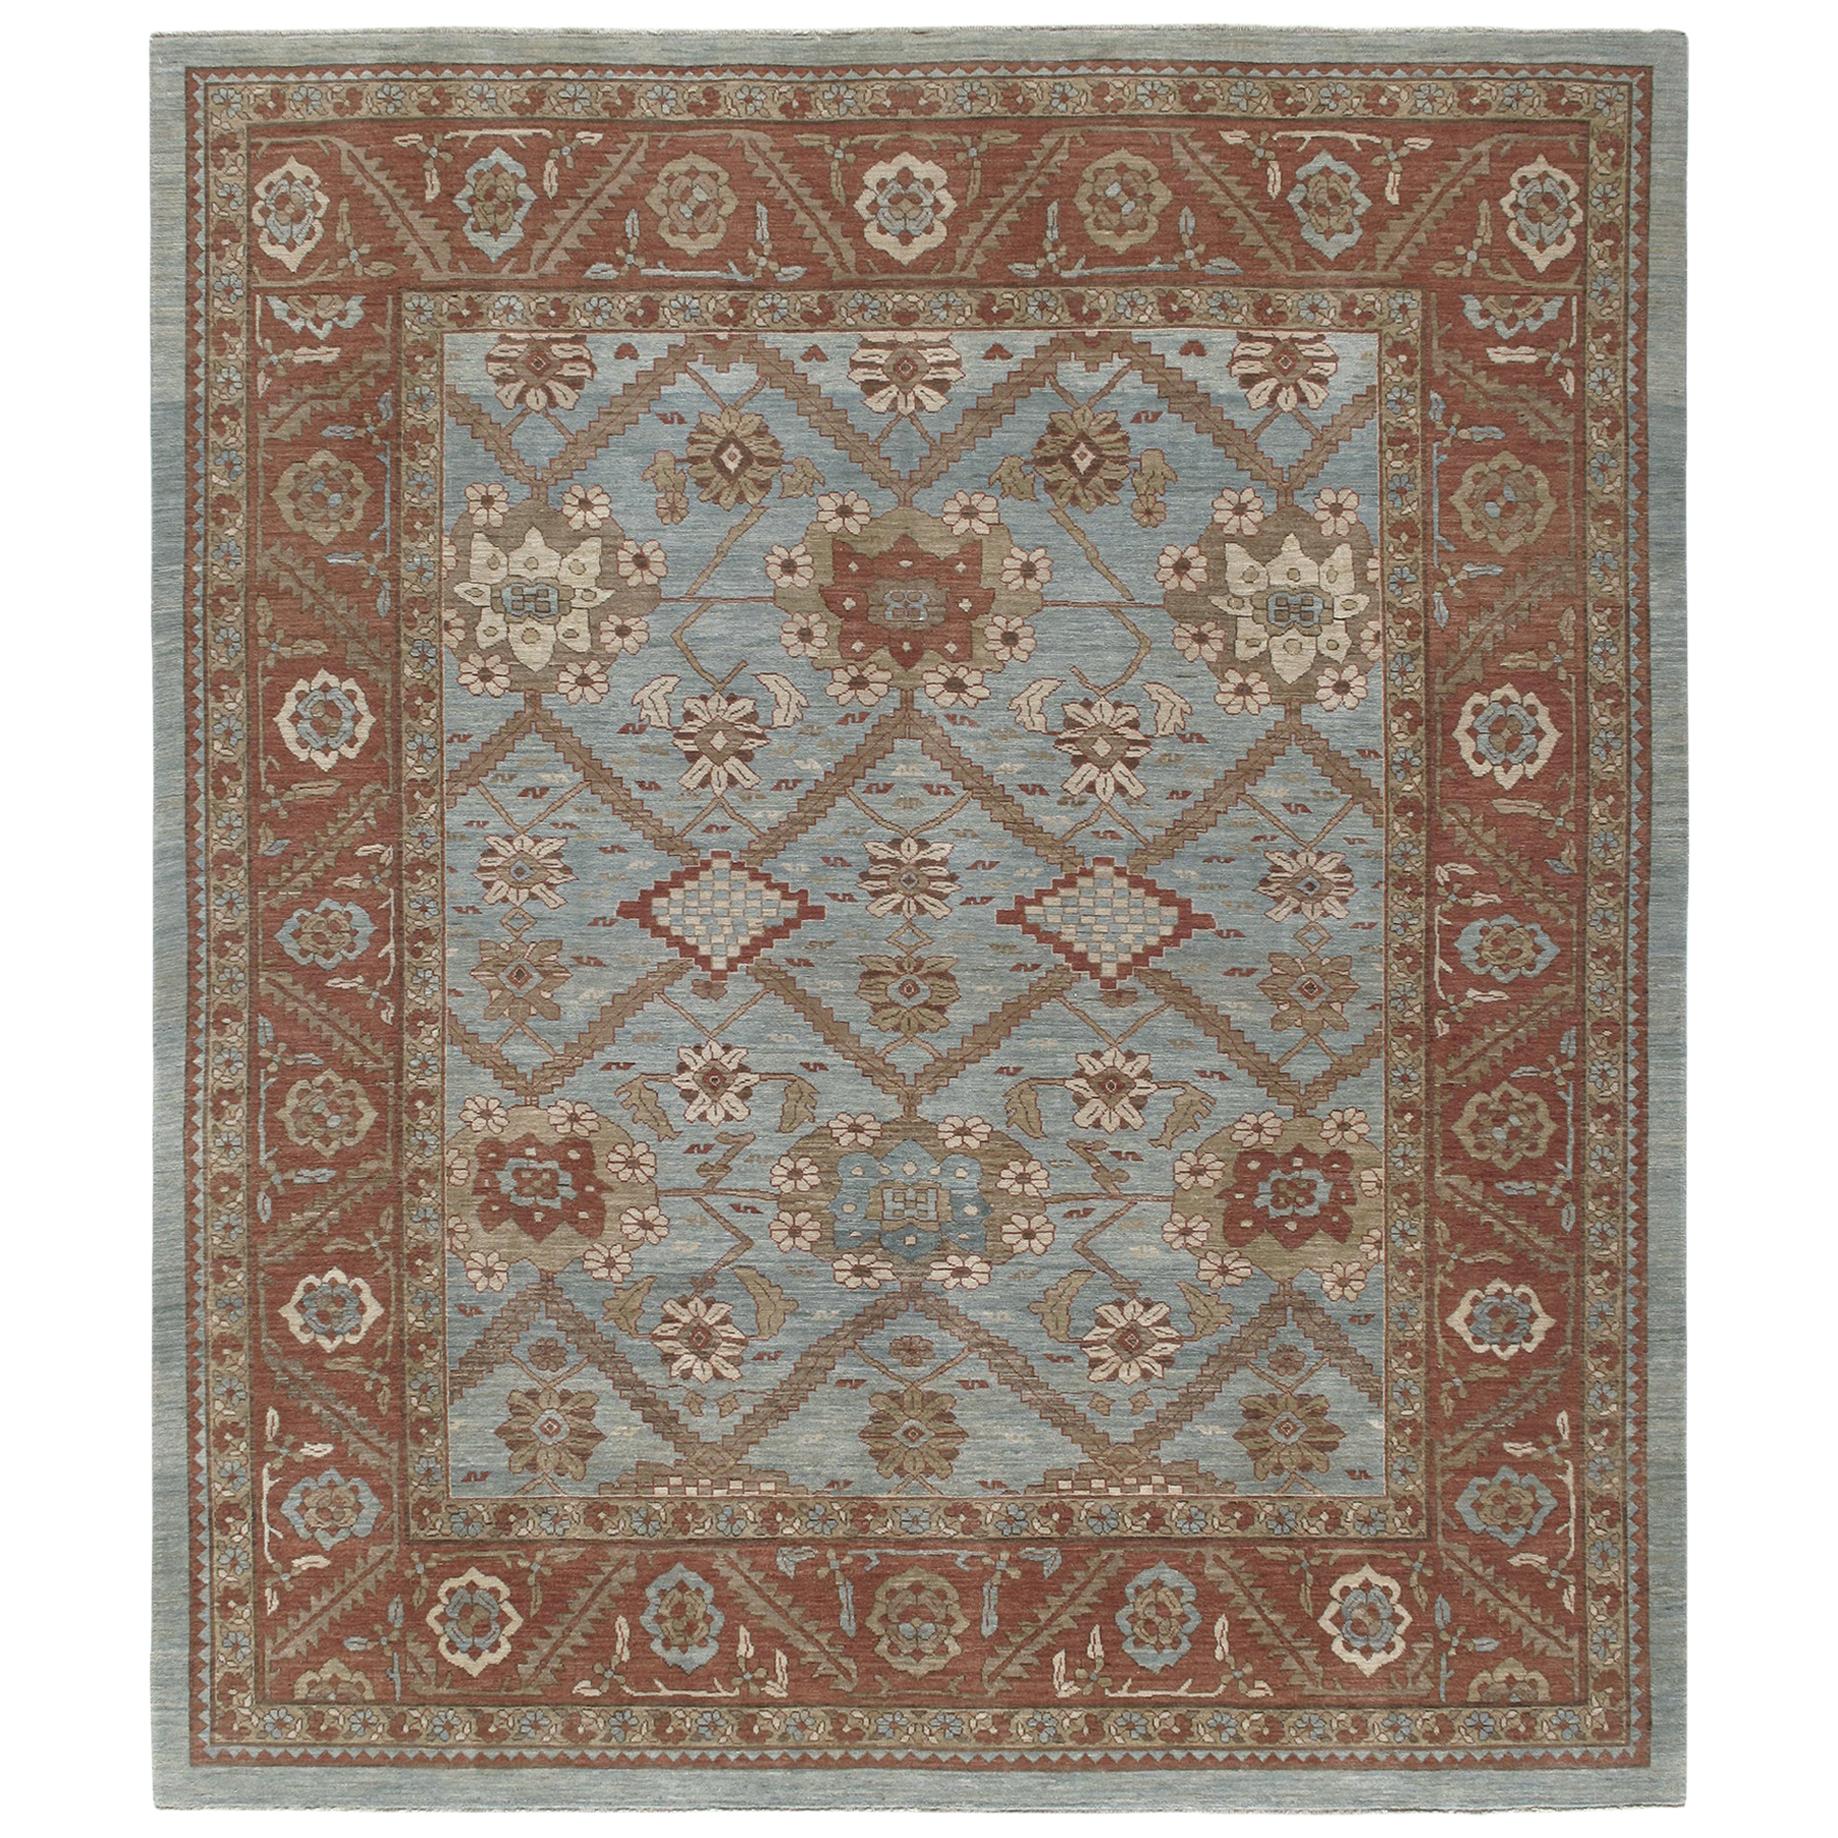 Persian Traditional Bakshaish Handknotted Rug in Pale Blue and Rust Color. For Sale